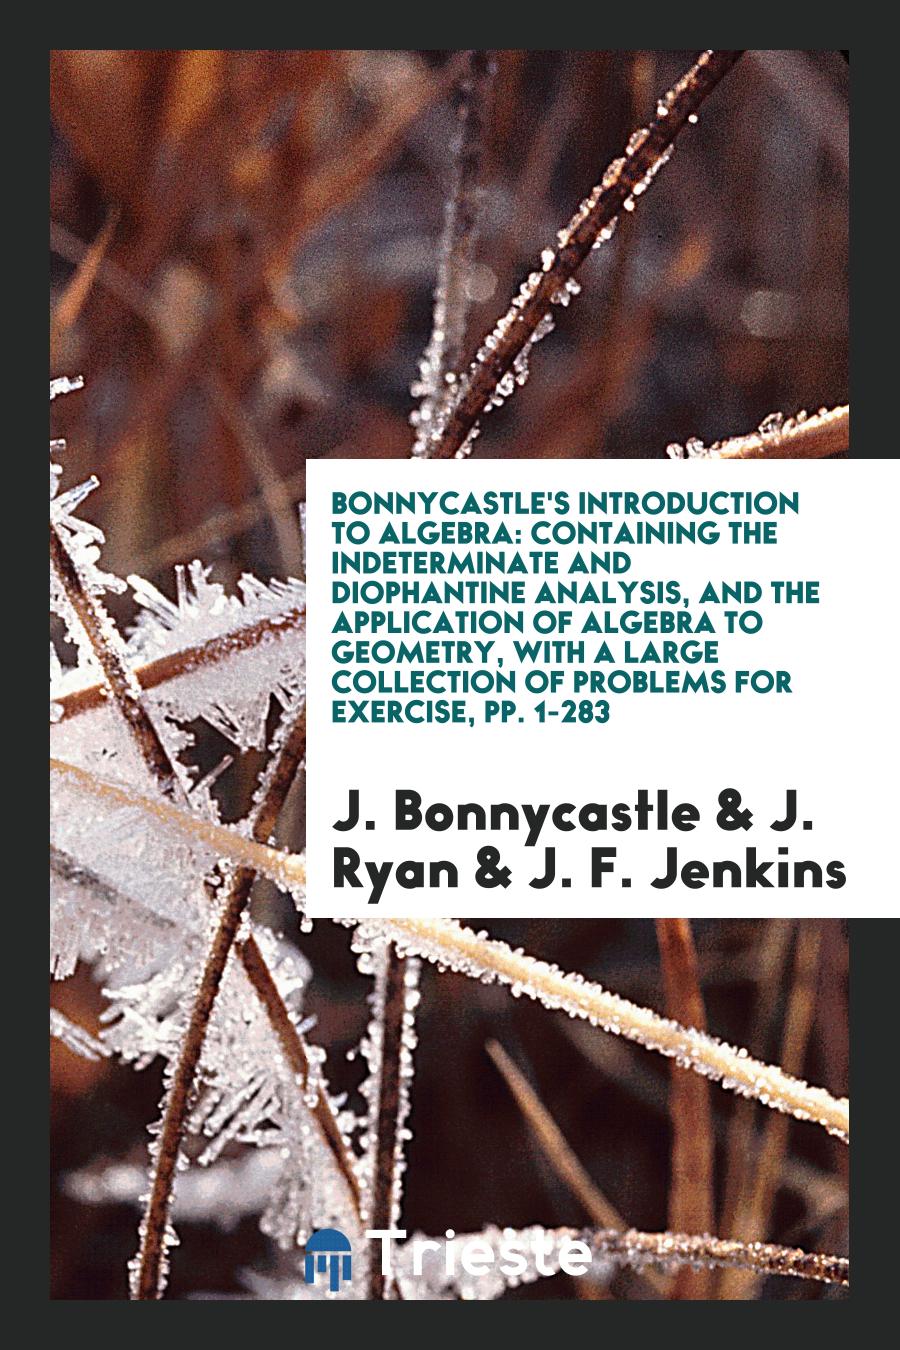 Bonnycastle's Introduction to Algebra: Containing the Indeterminate and Diophantine Analysis, and the Application of Algebra to Geometry, with a Large Collection of Problems for Exercise, pp. 1-283